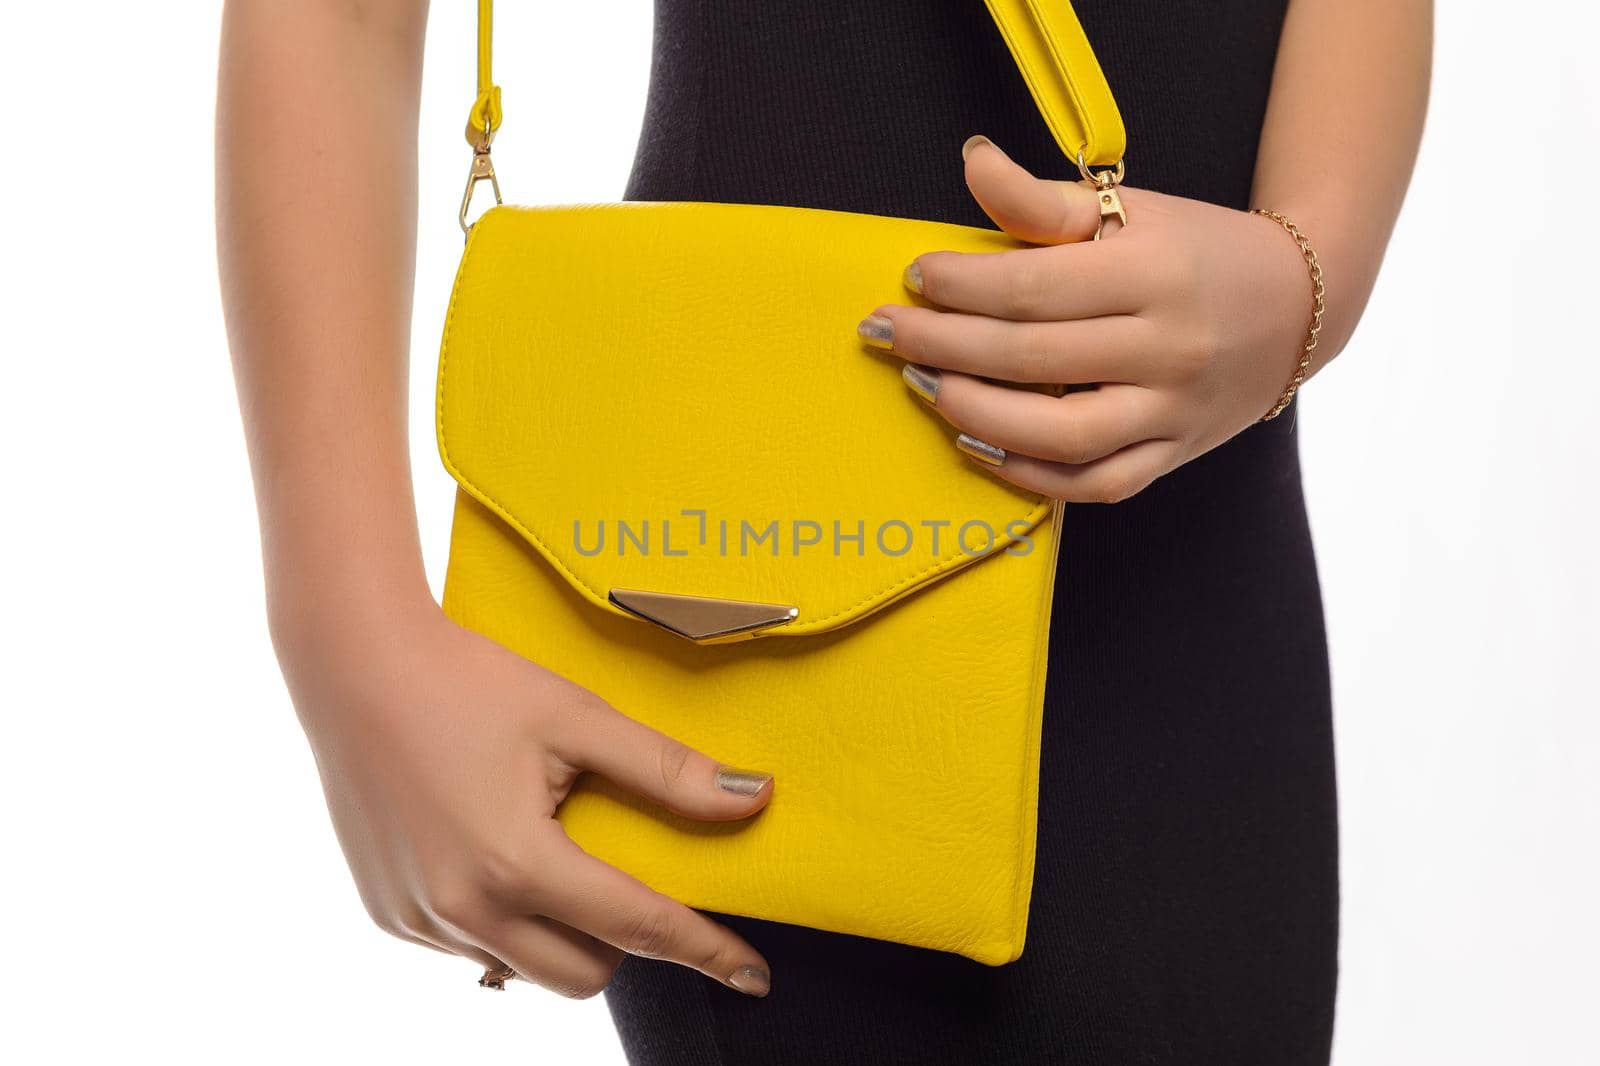 The fashionable young woman holding yellow handbag white background by zartarn